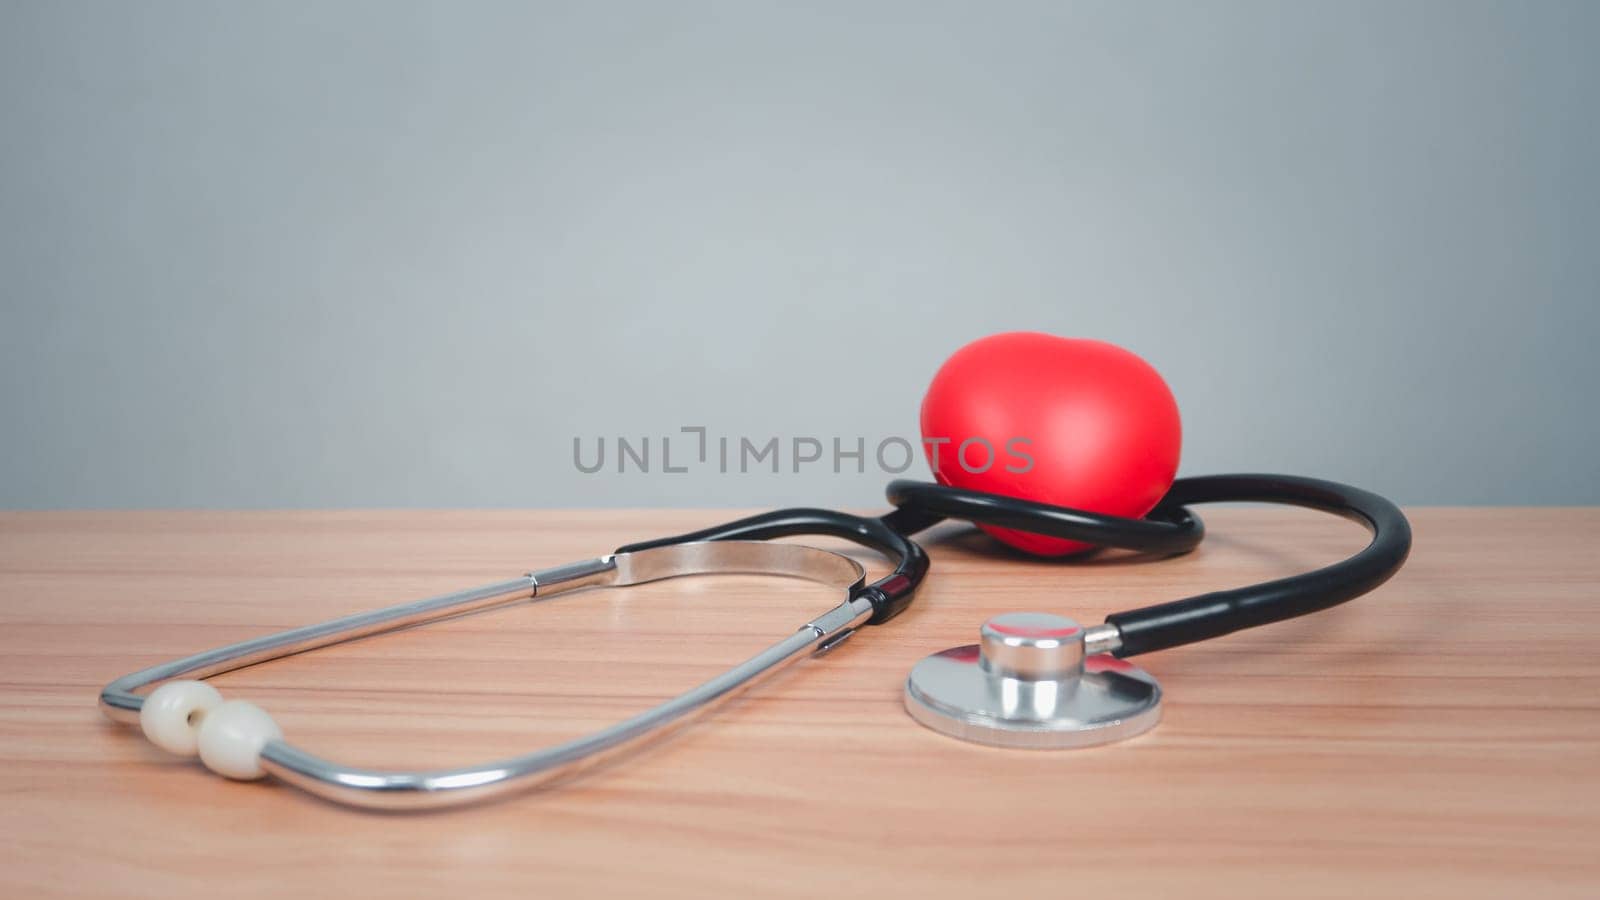 Red heart with headphones on a wooden table background. Medical and healthcare concepts.